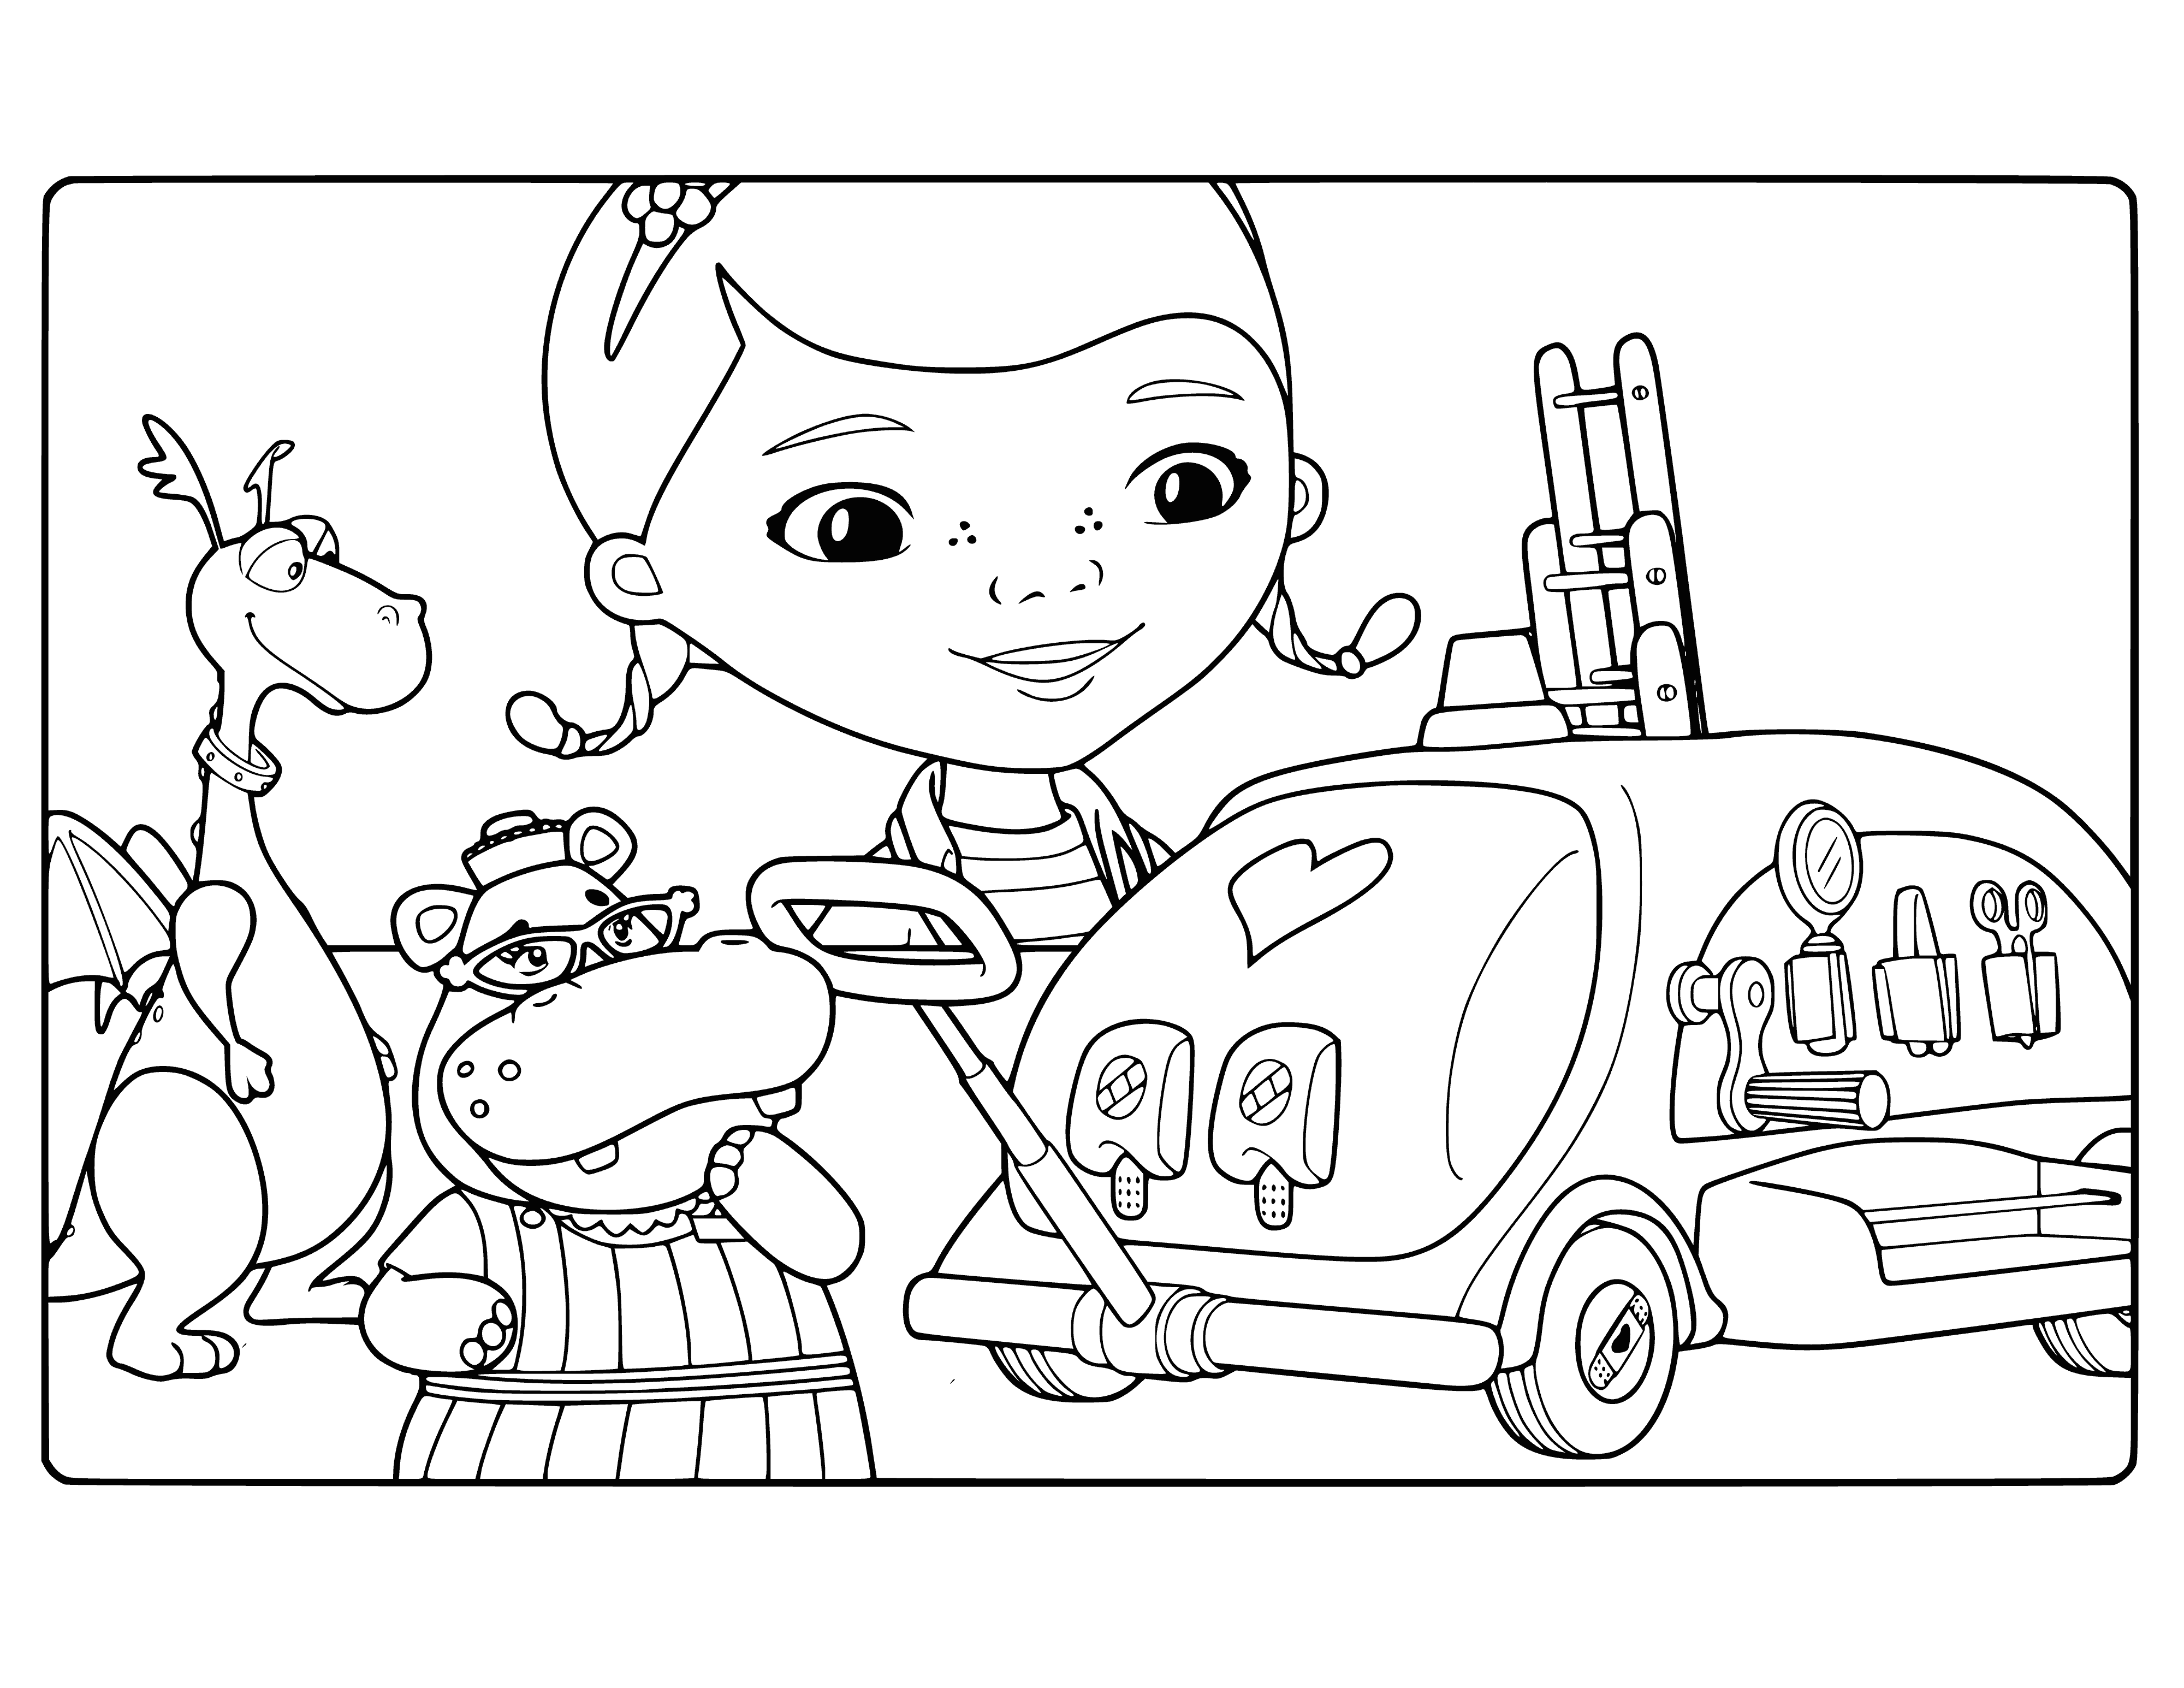 Doctor Plyusheva examines coloring page